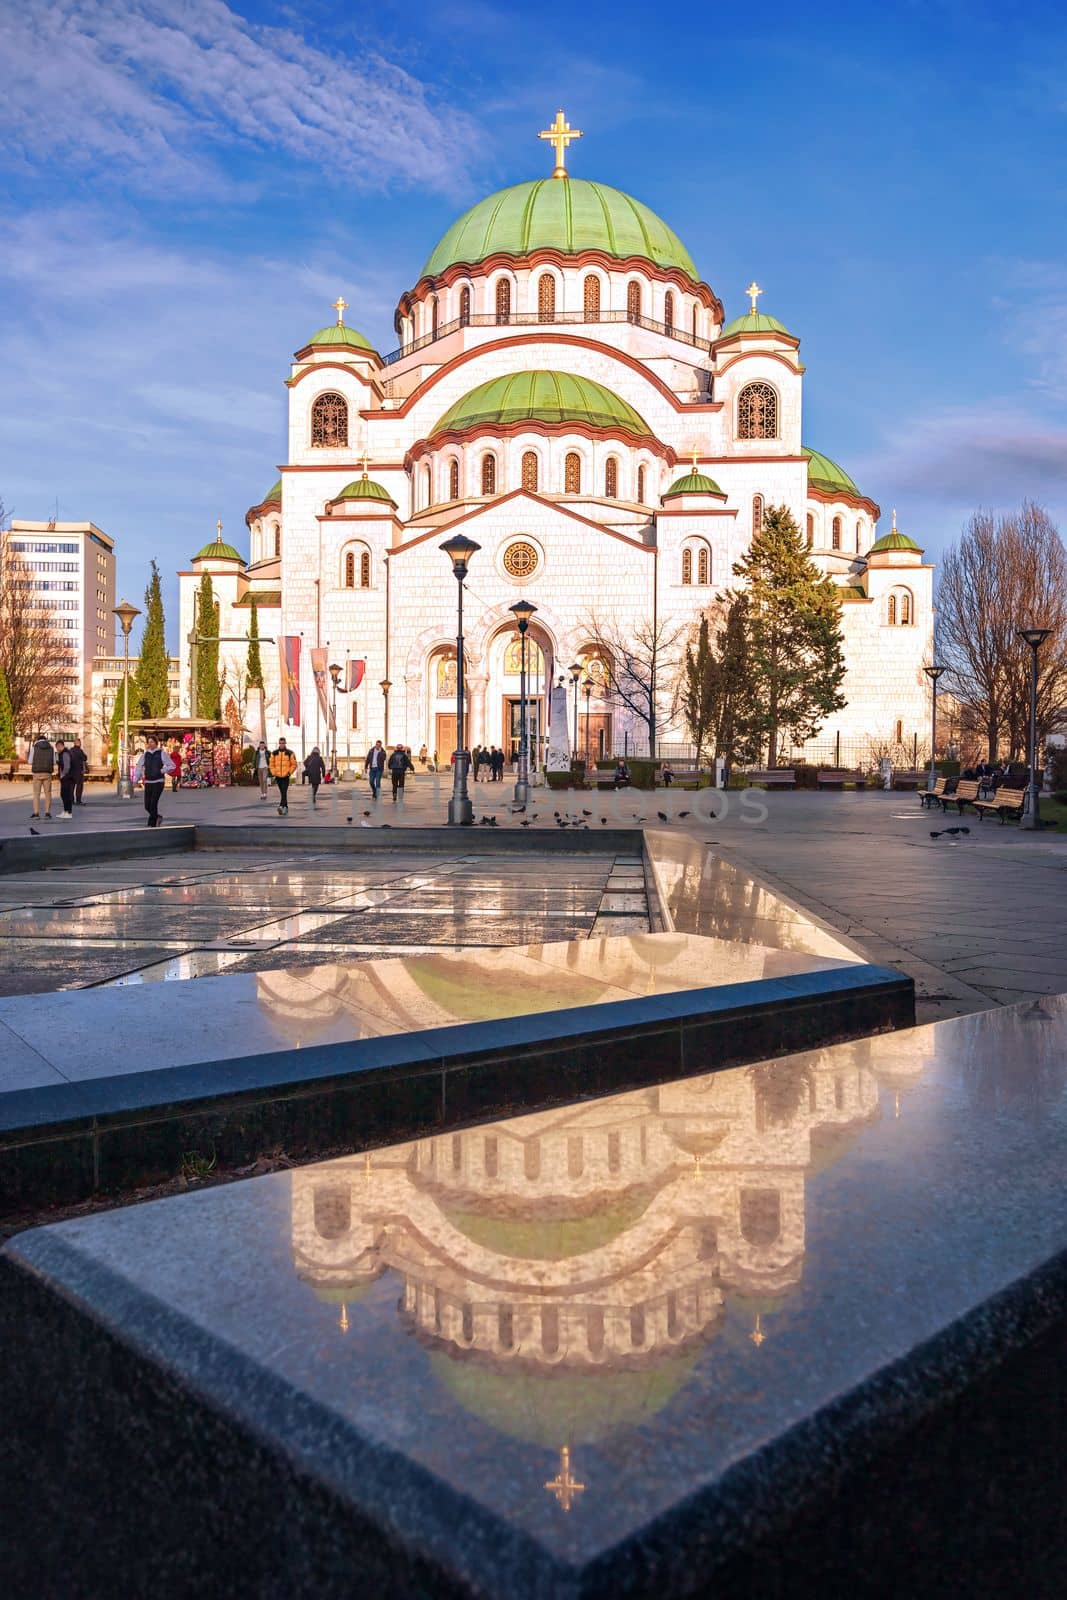 Belgrade, Serbia - February 20, 2023: Church of Saint Sava is the largest Orthodox church in Serbia, one of the largest Eastern Orthodox churches and it ranks among the largest churches in the world.